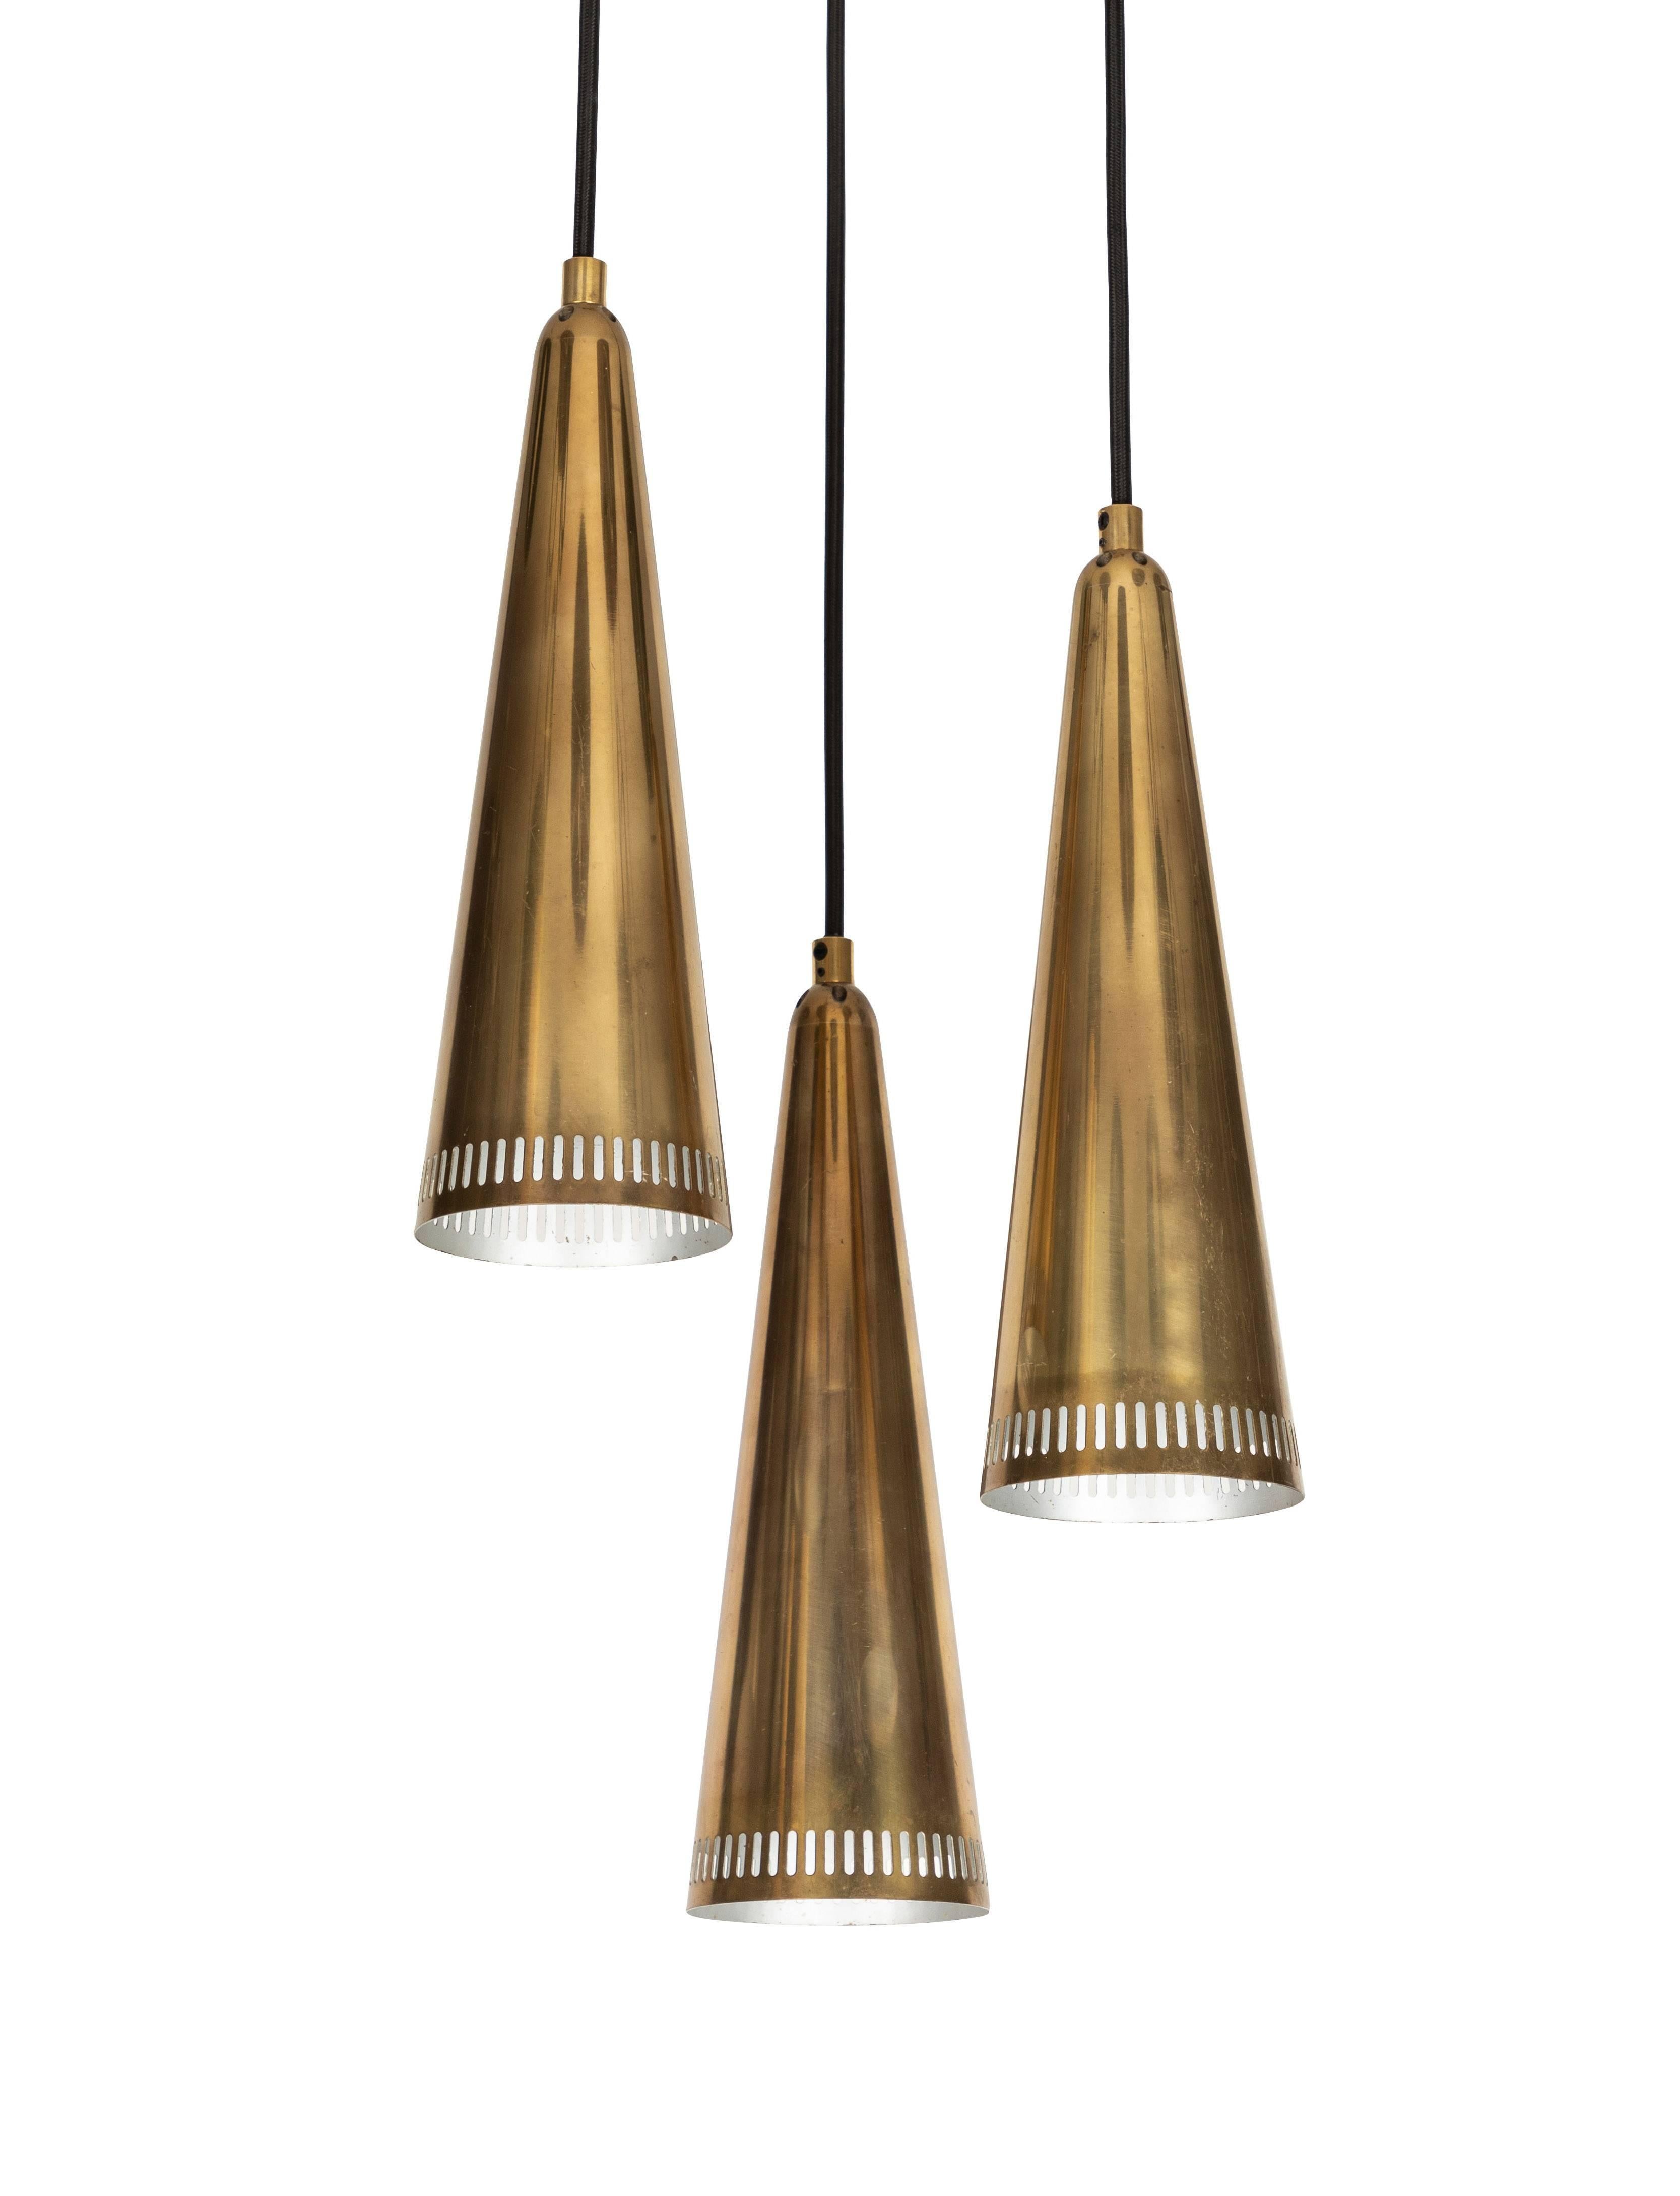 1950s Mauri Almari 'K2-48' chandelier for Idman. This cascading chandelier features a trio of perforated brass cones that each measure 13 inches H x 4.25 inches W.